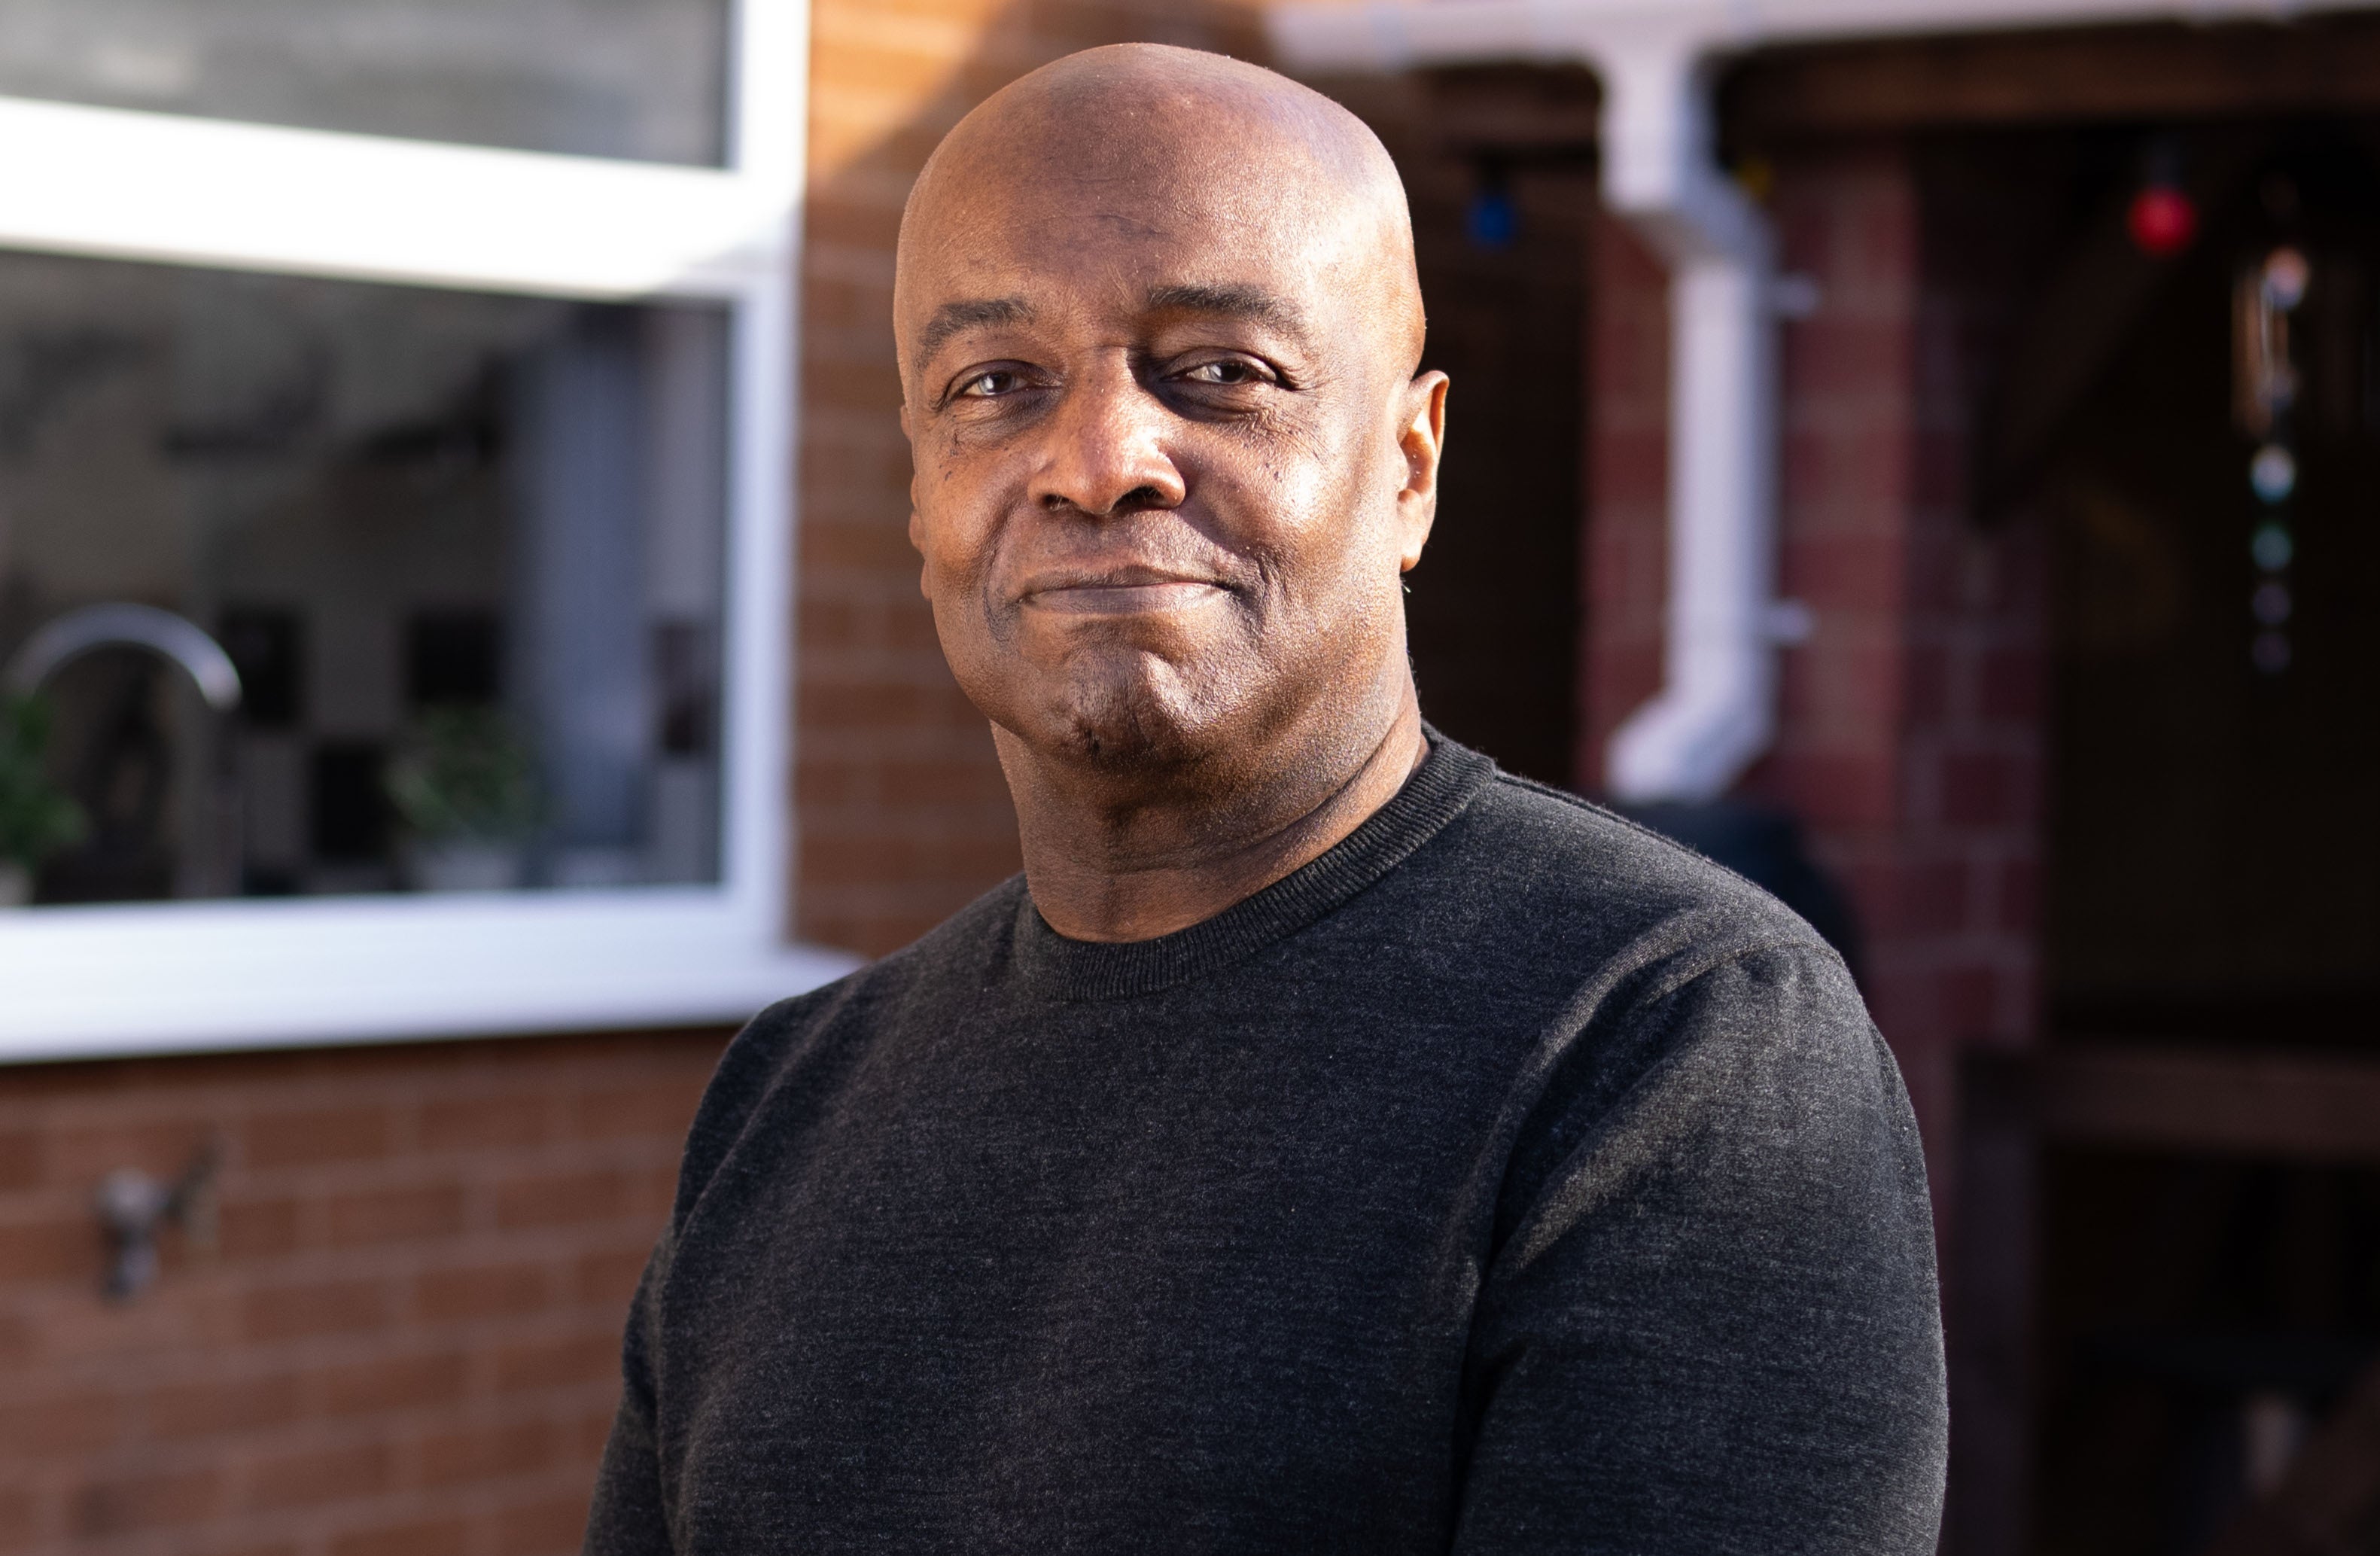 Mr Greene now runs a support group for other Black men affected by cancer